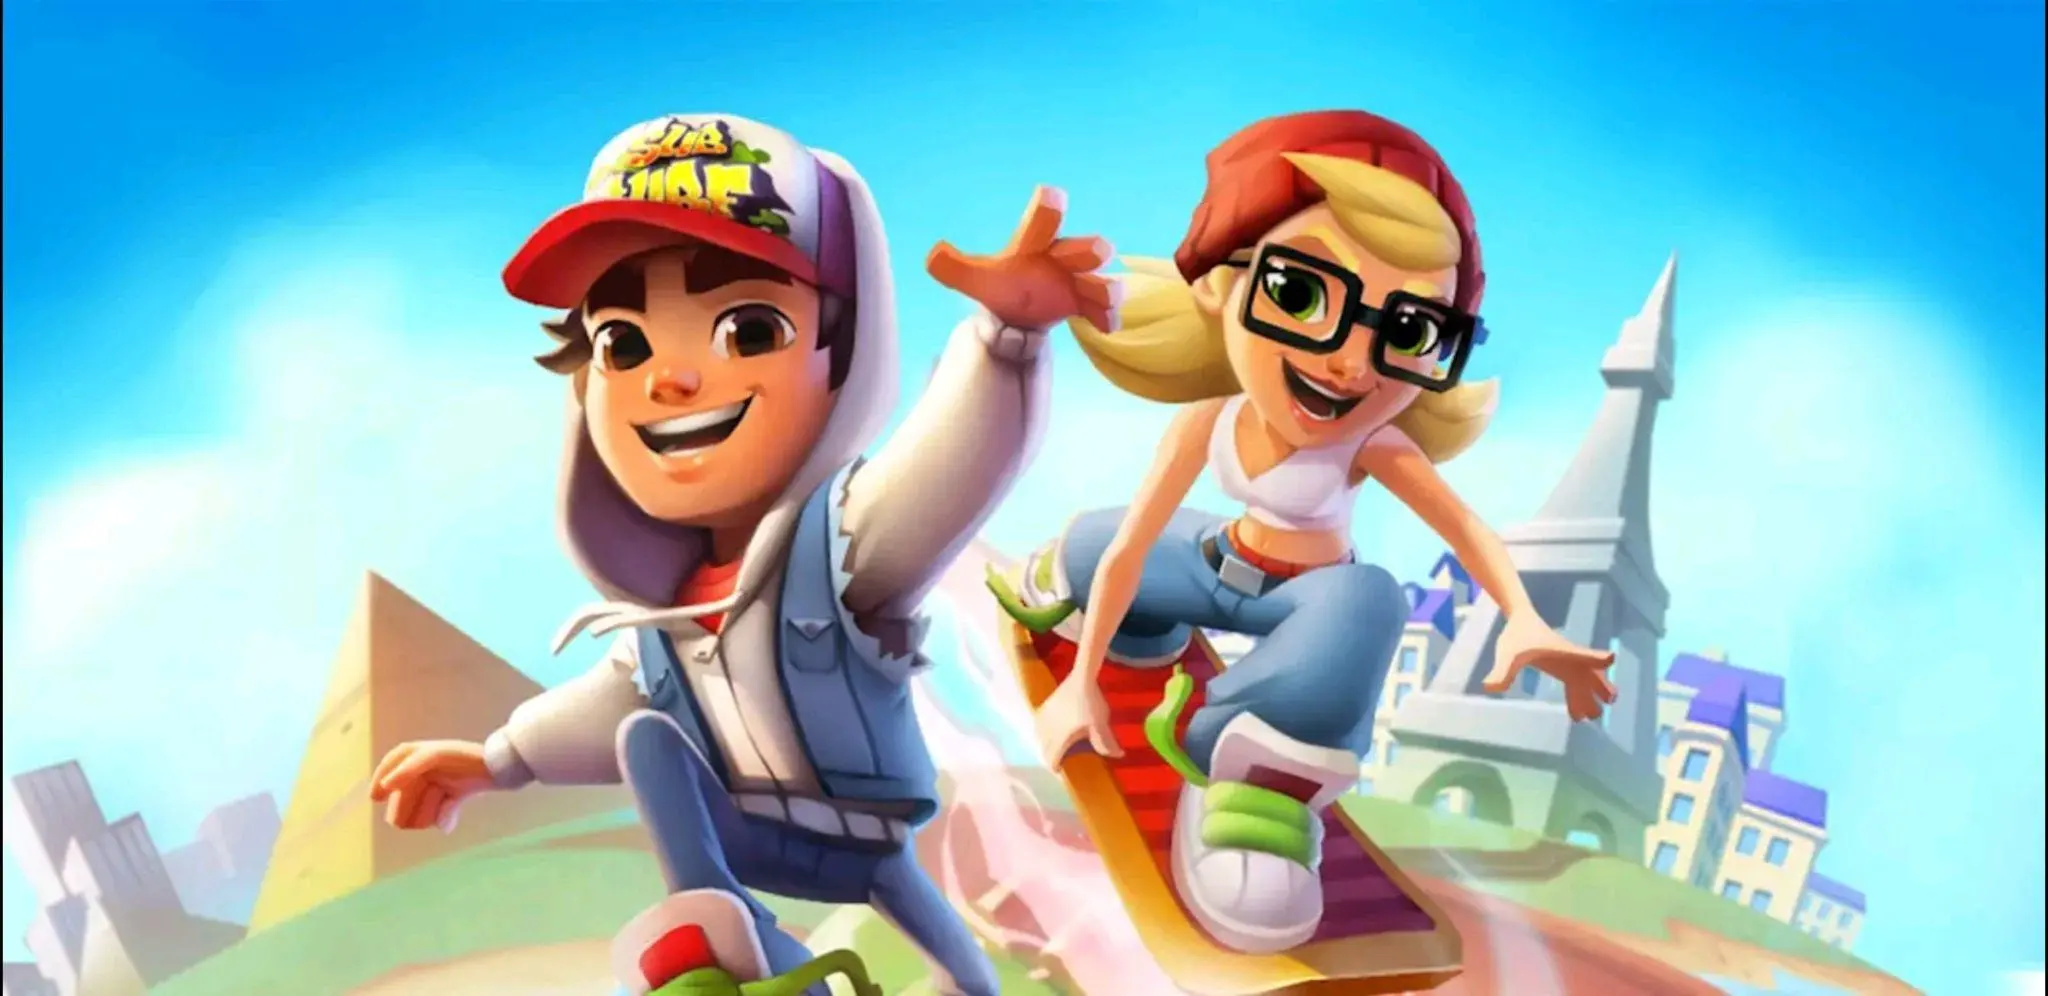 Download Subway Surfers (GameLoop) 3.3.1 for Windows